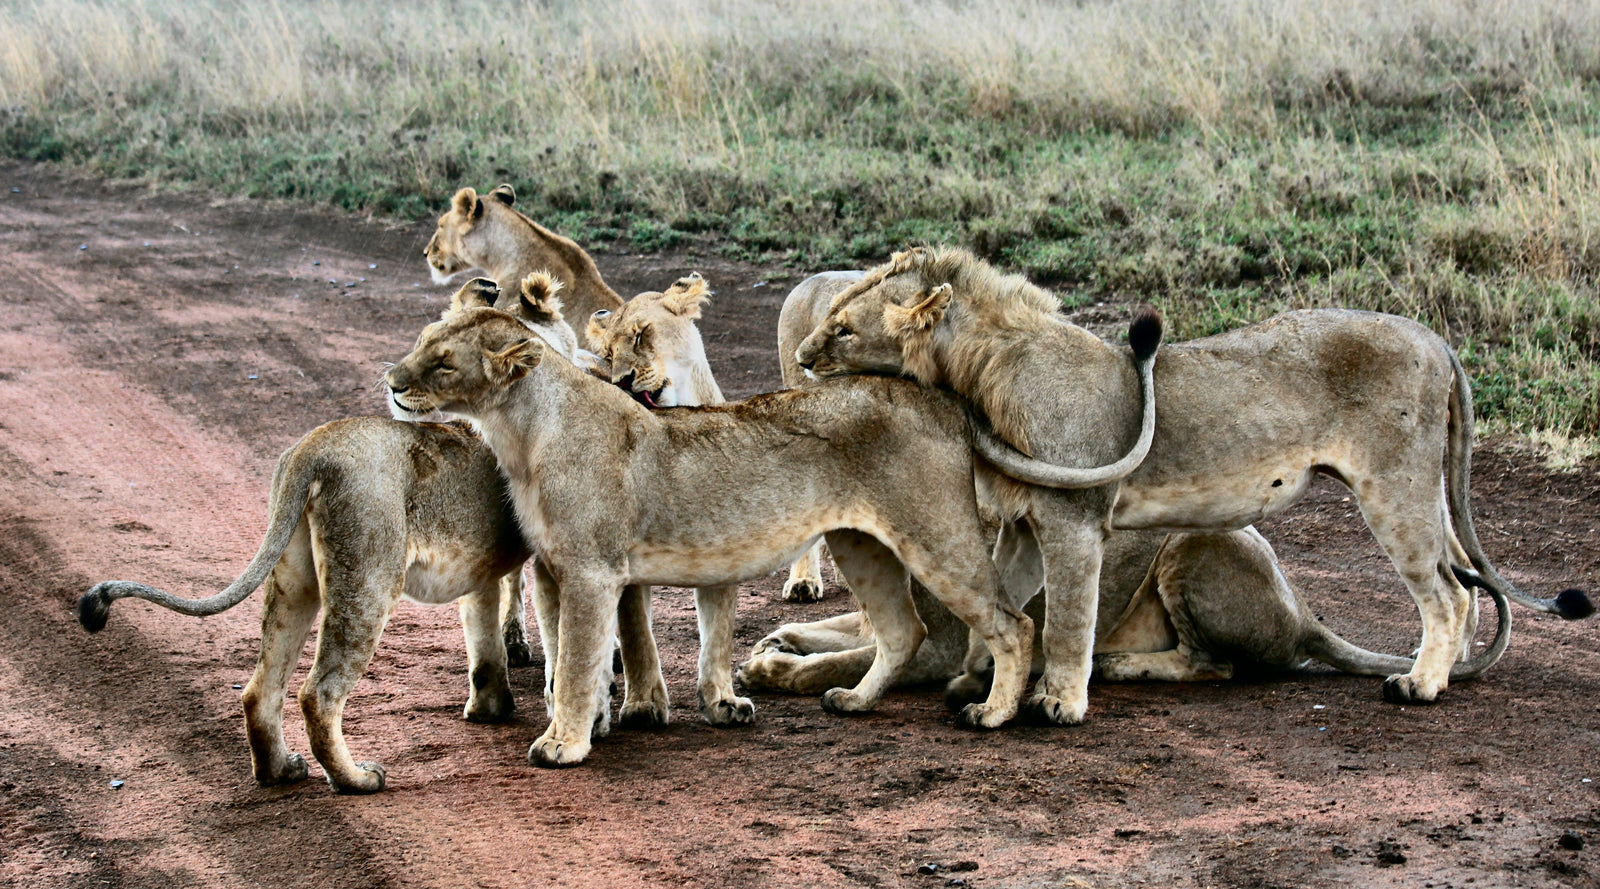 lions all standing together and rubbing against each other